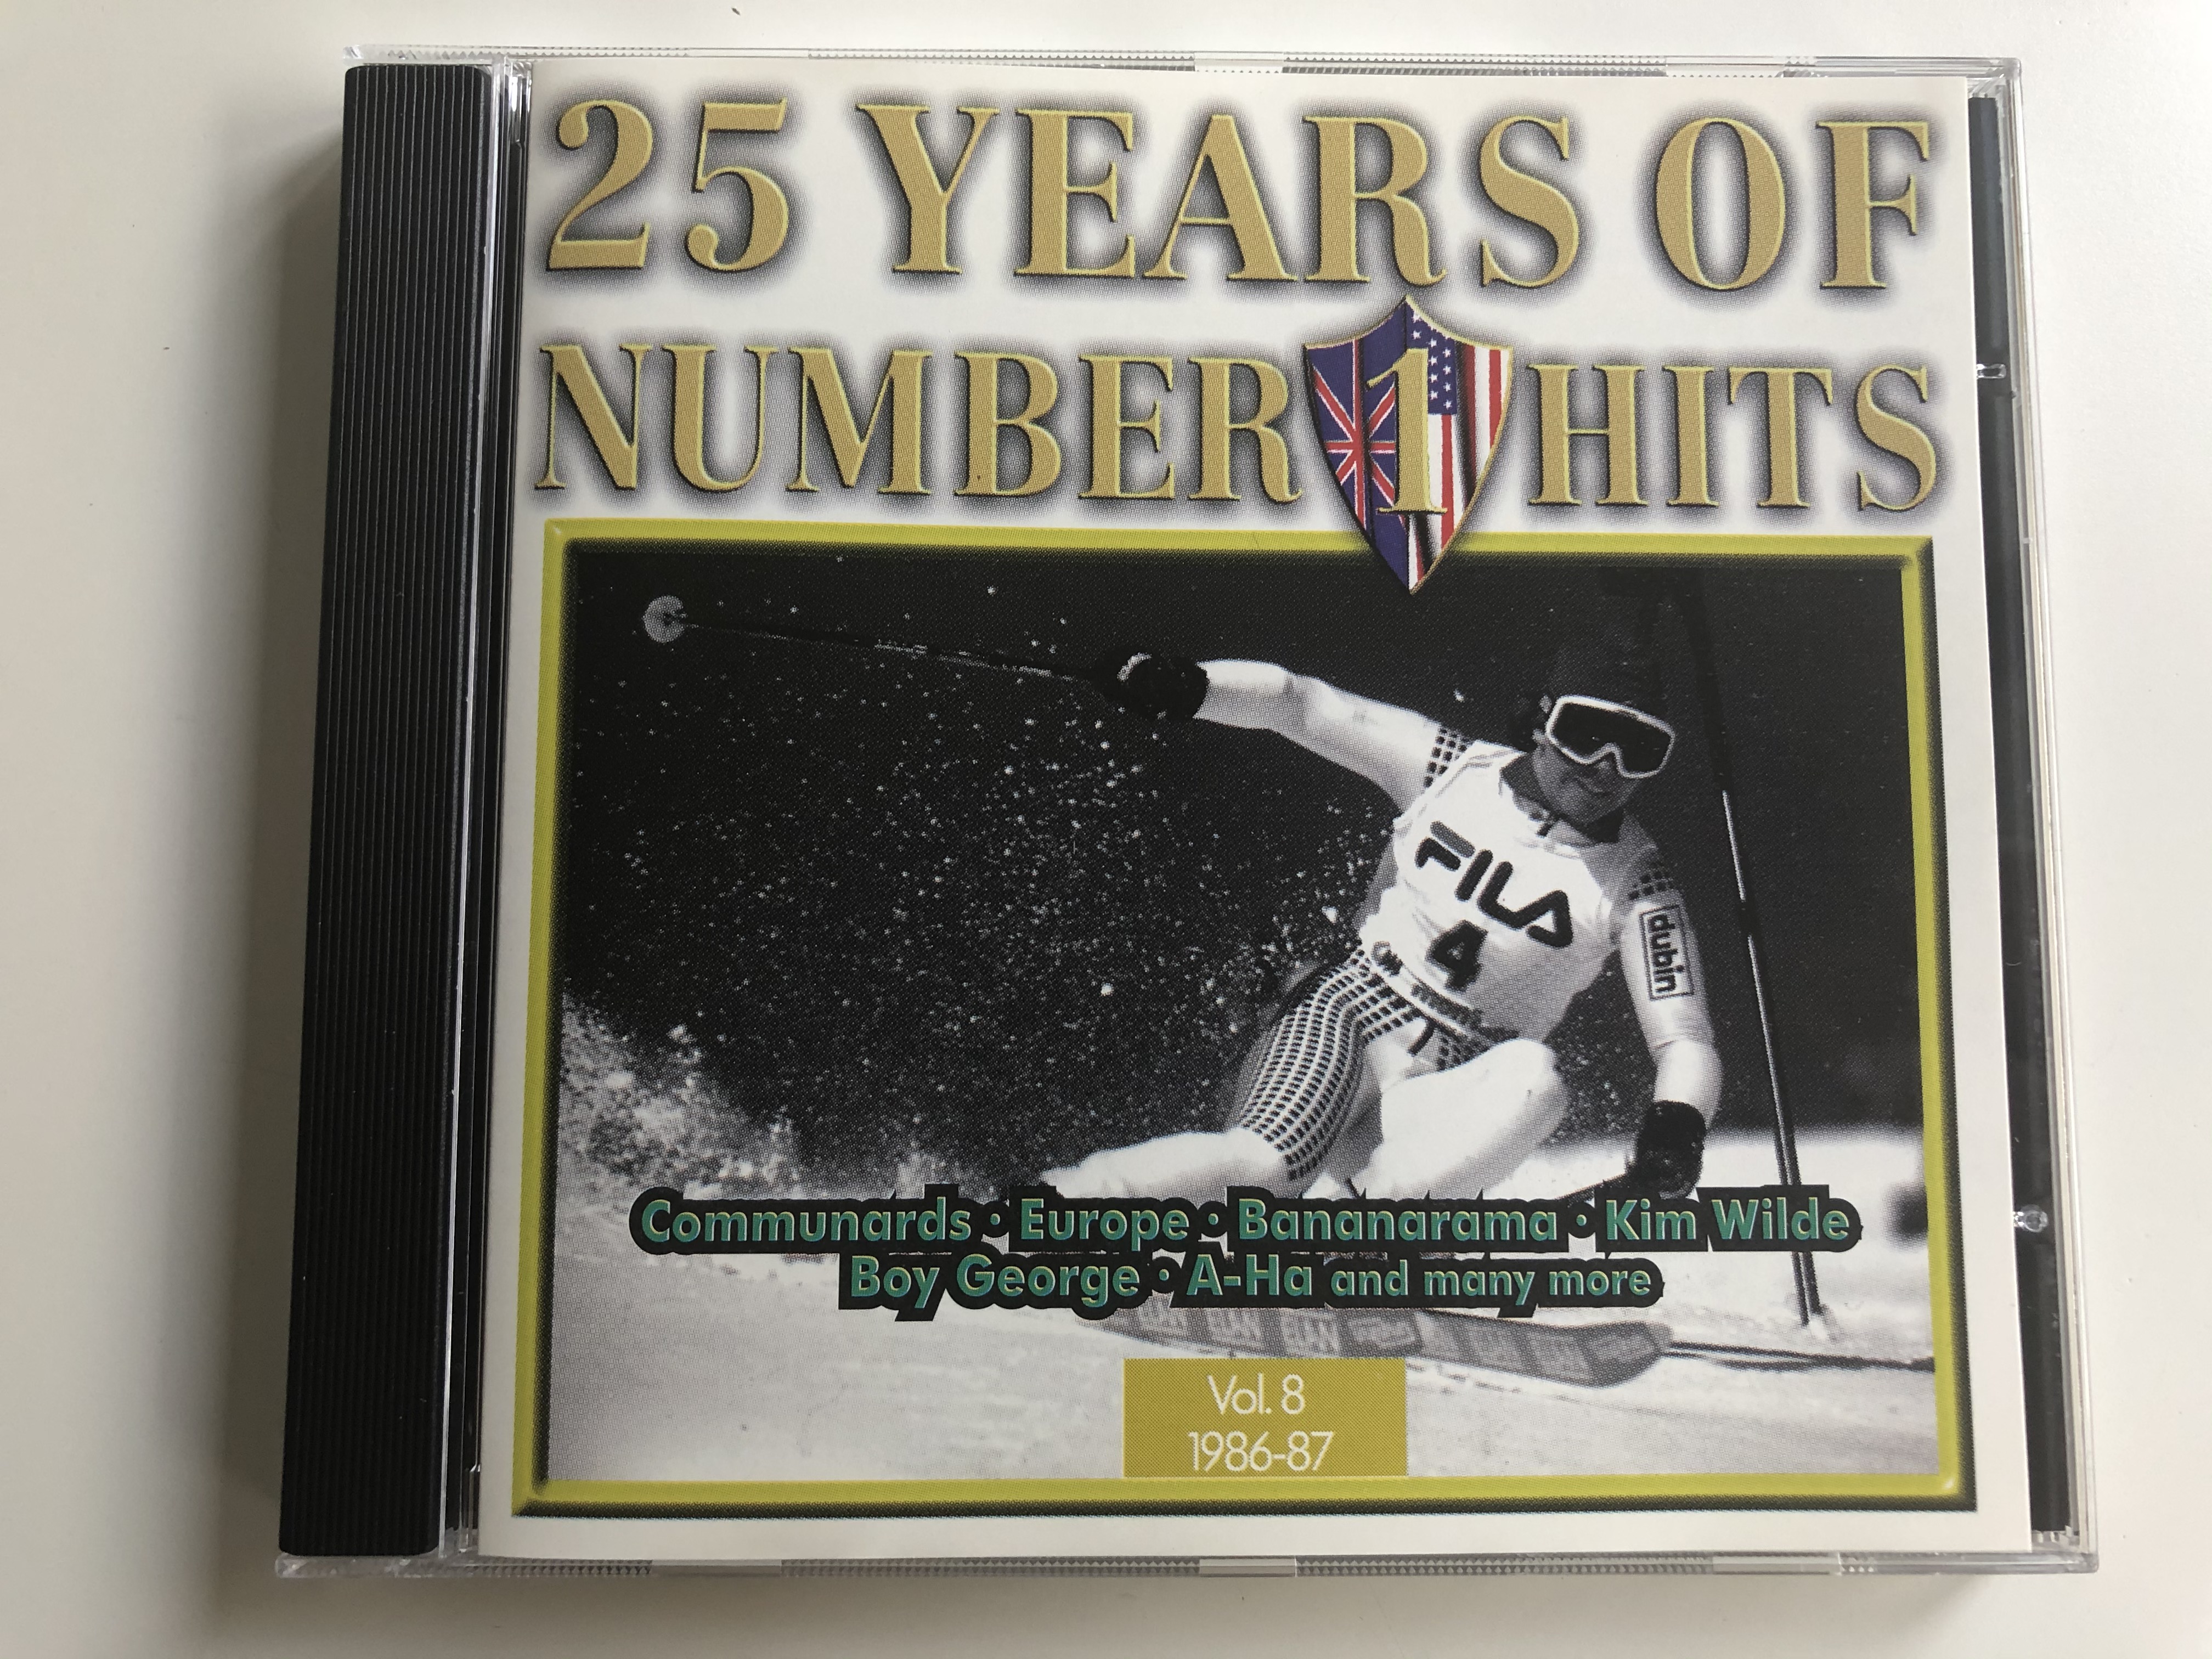 25-years-of-number-1-hits-vol.-8-1986-87-connoisseur-collection-audio-cd-1996-wone-cd-08-1-.jpg